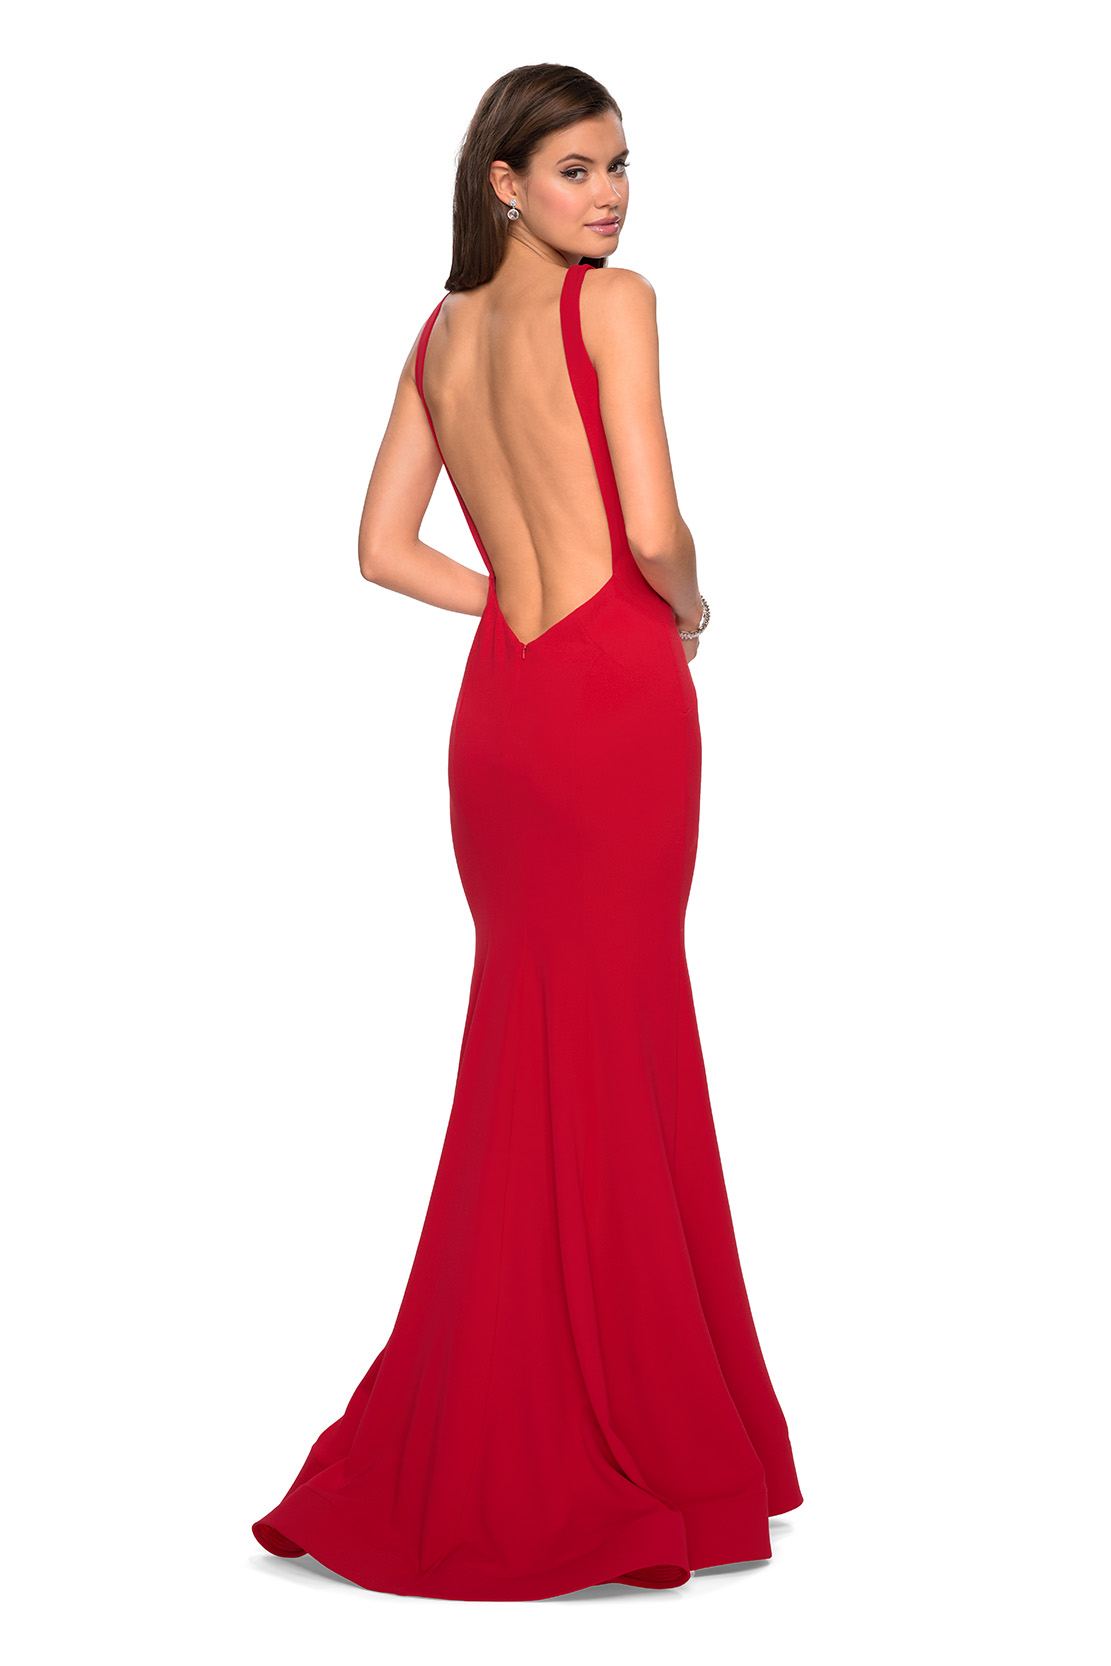 Red Backless Prom Dress in Jersey Fabric, Back Picture